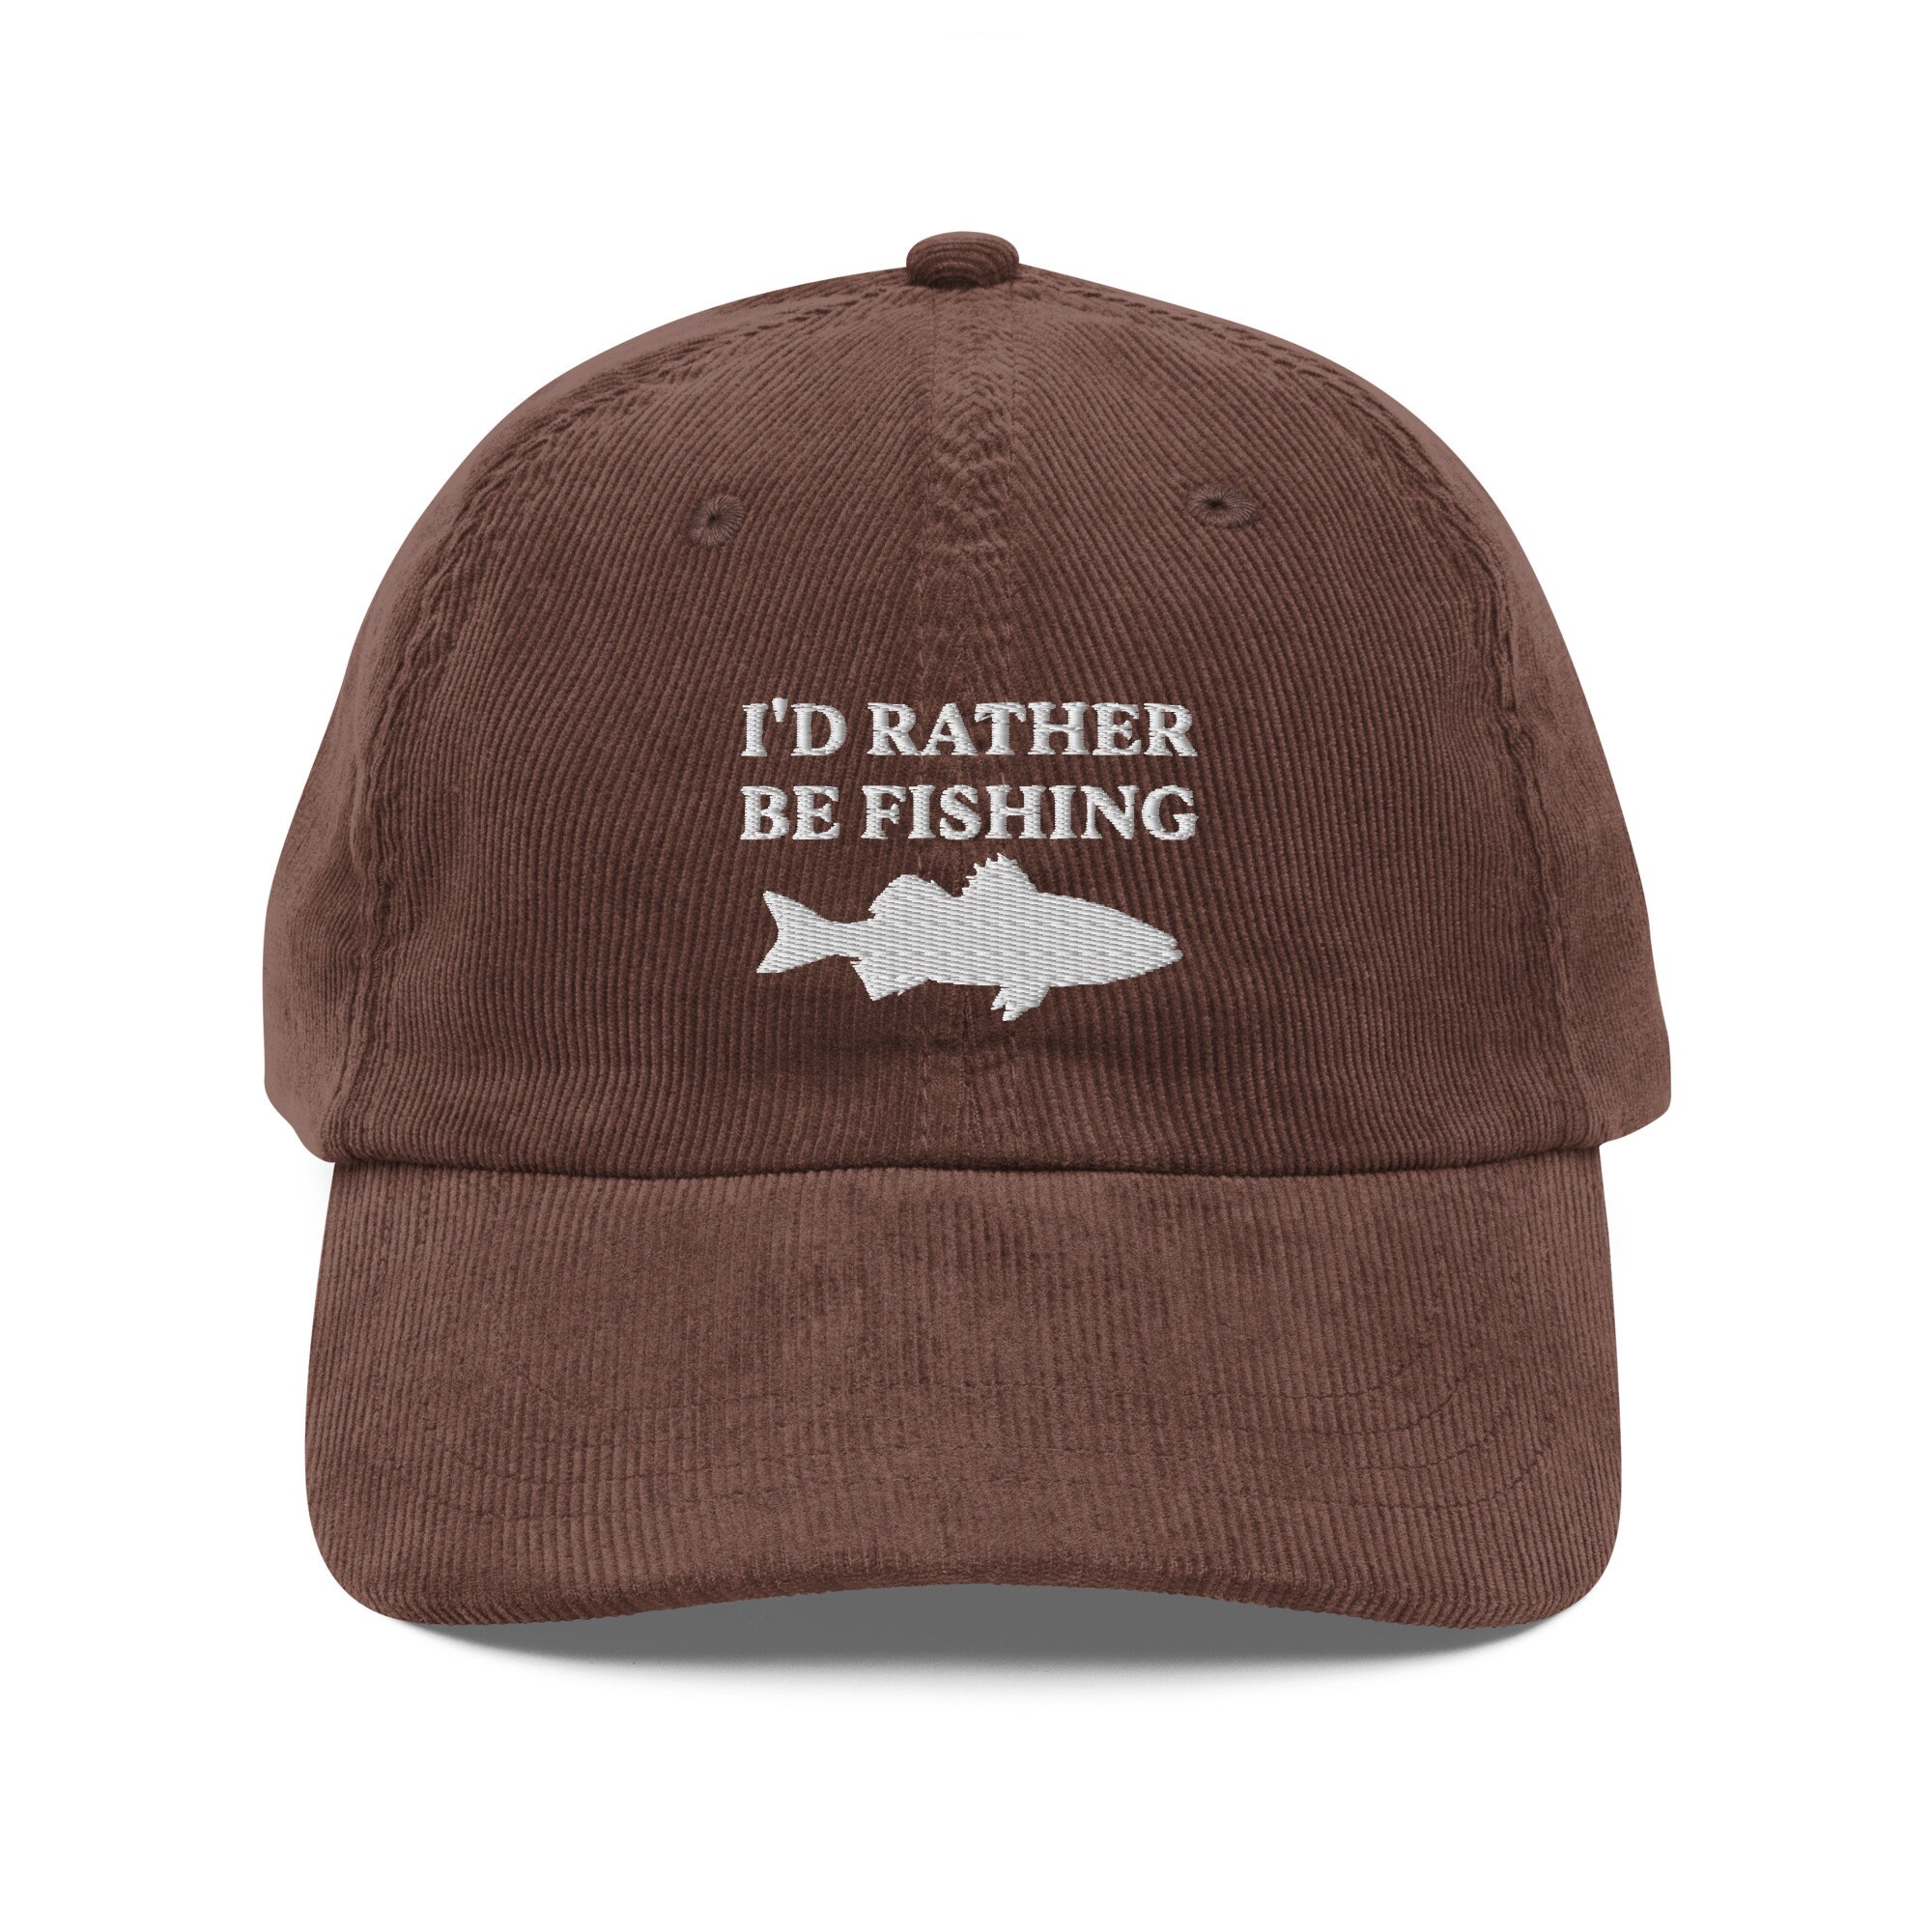 I'd Rather Be Fishing Corduroy Hat Embroidered Vintage Hat